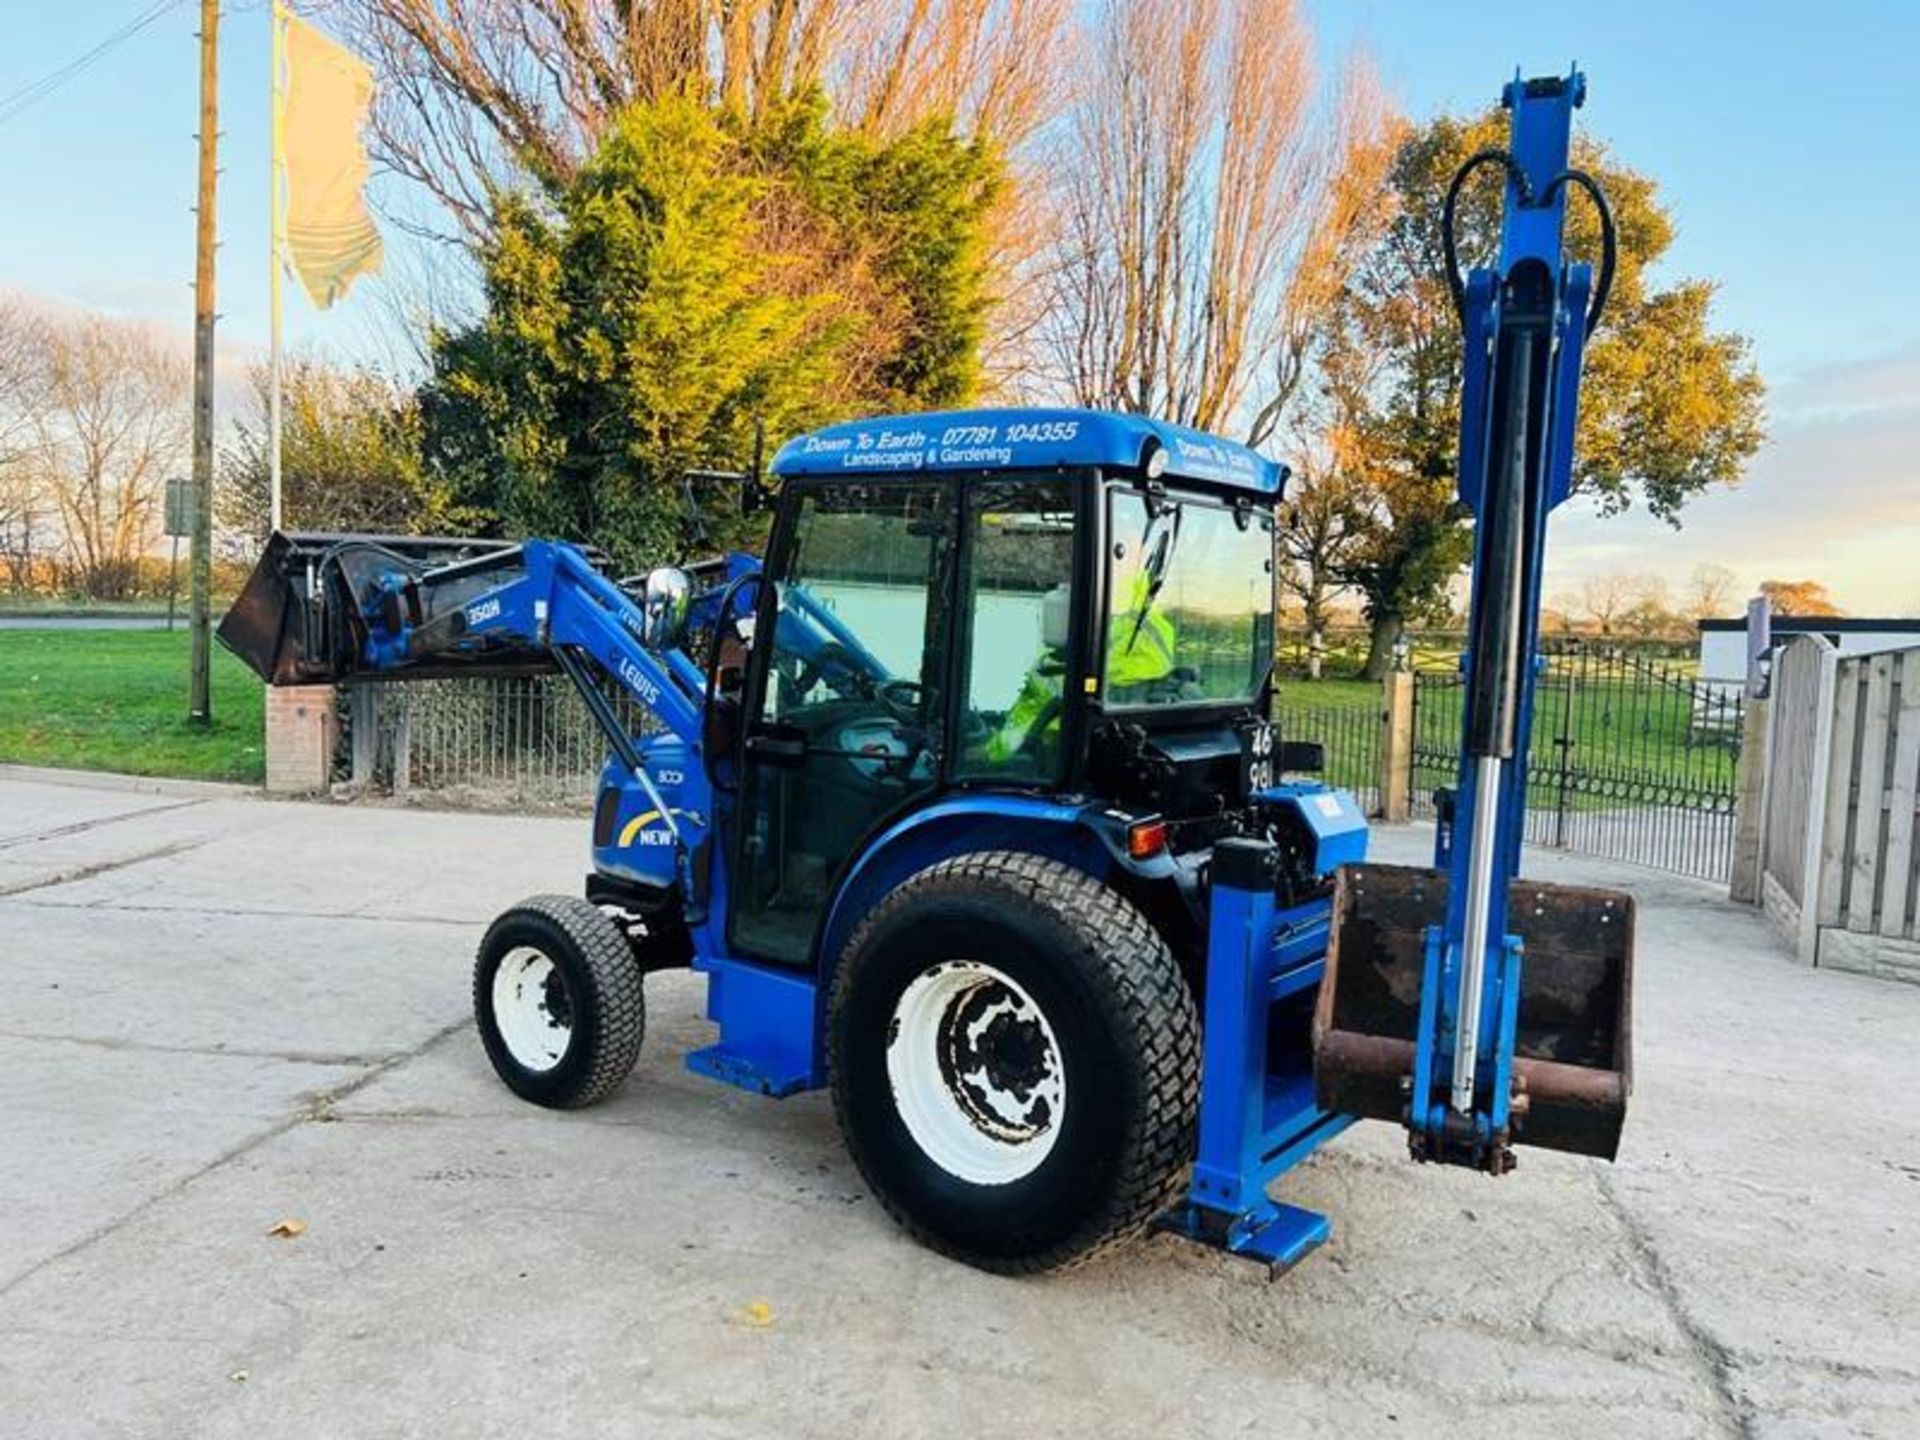 NEW HOLLAND BOOMER 40 4WD TRACTOR *YEAR 2014, ONLY 737 HRS* C/W LOADER & BACK TRACTOR - Image 2 of 19